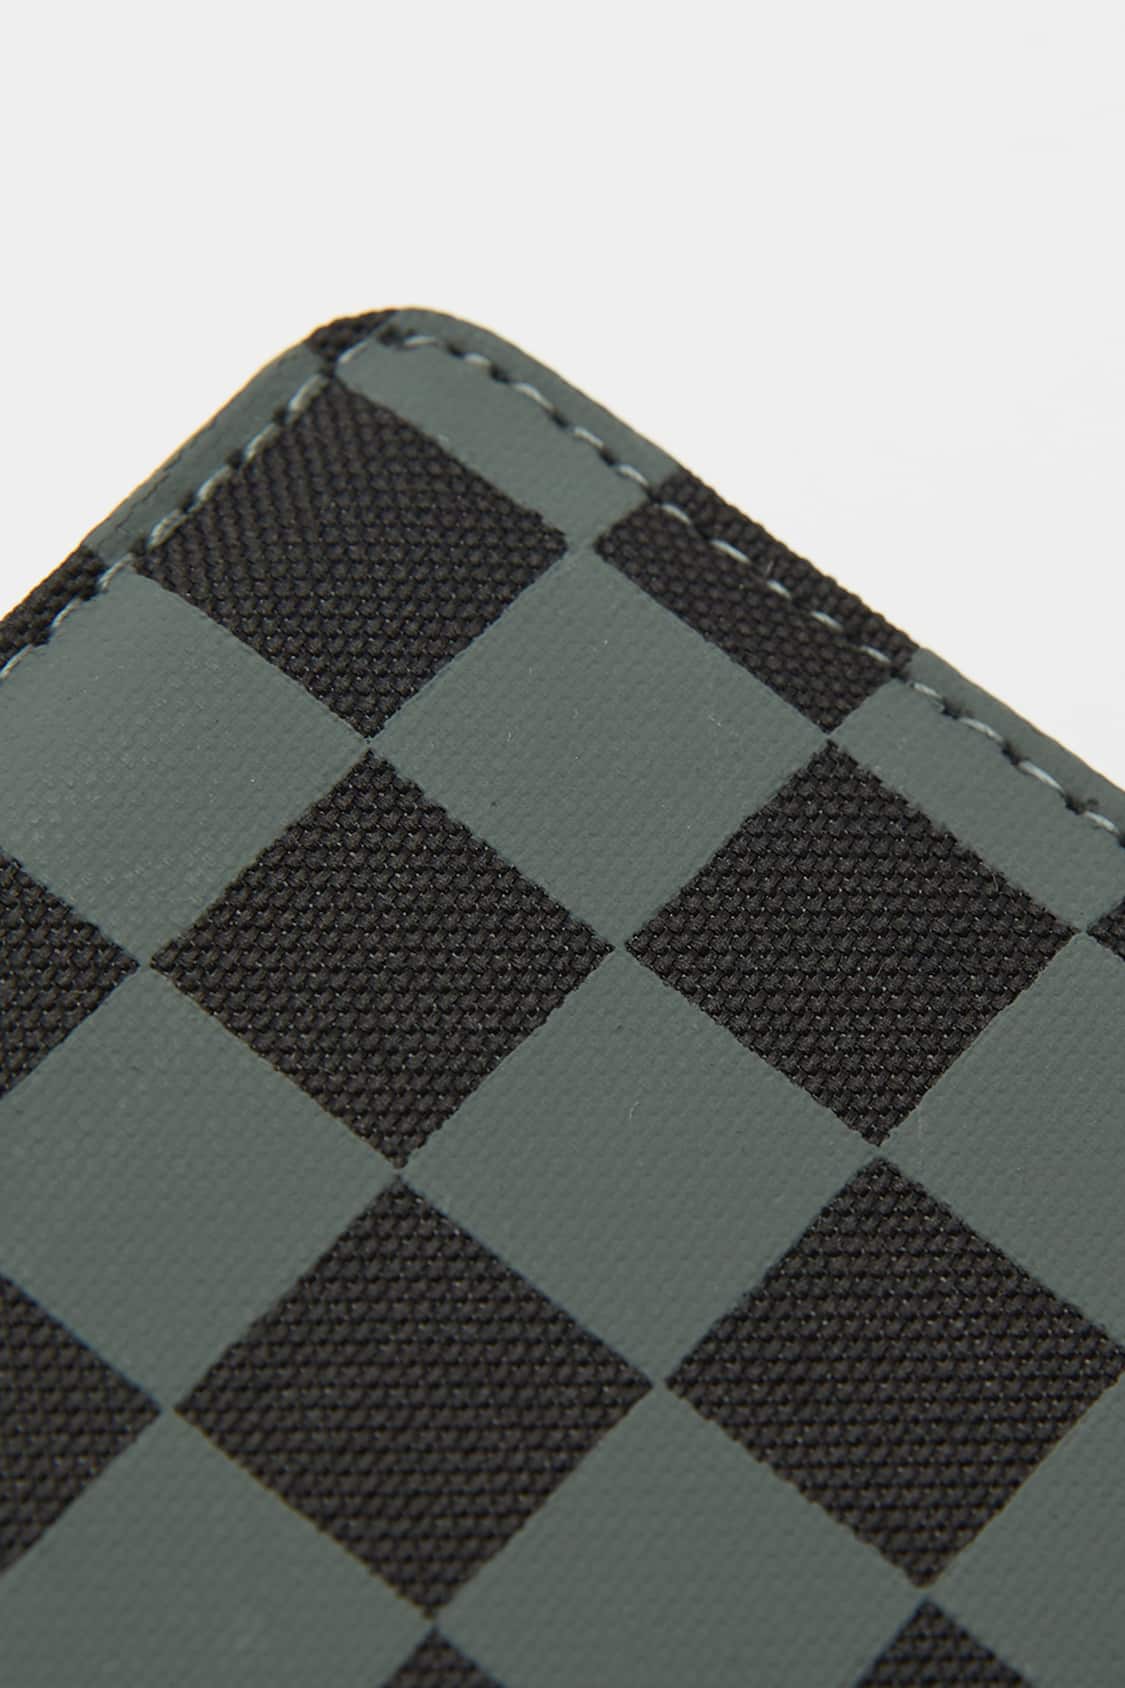 Pull&Bear Men's Checkered Faux Leather Wallet